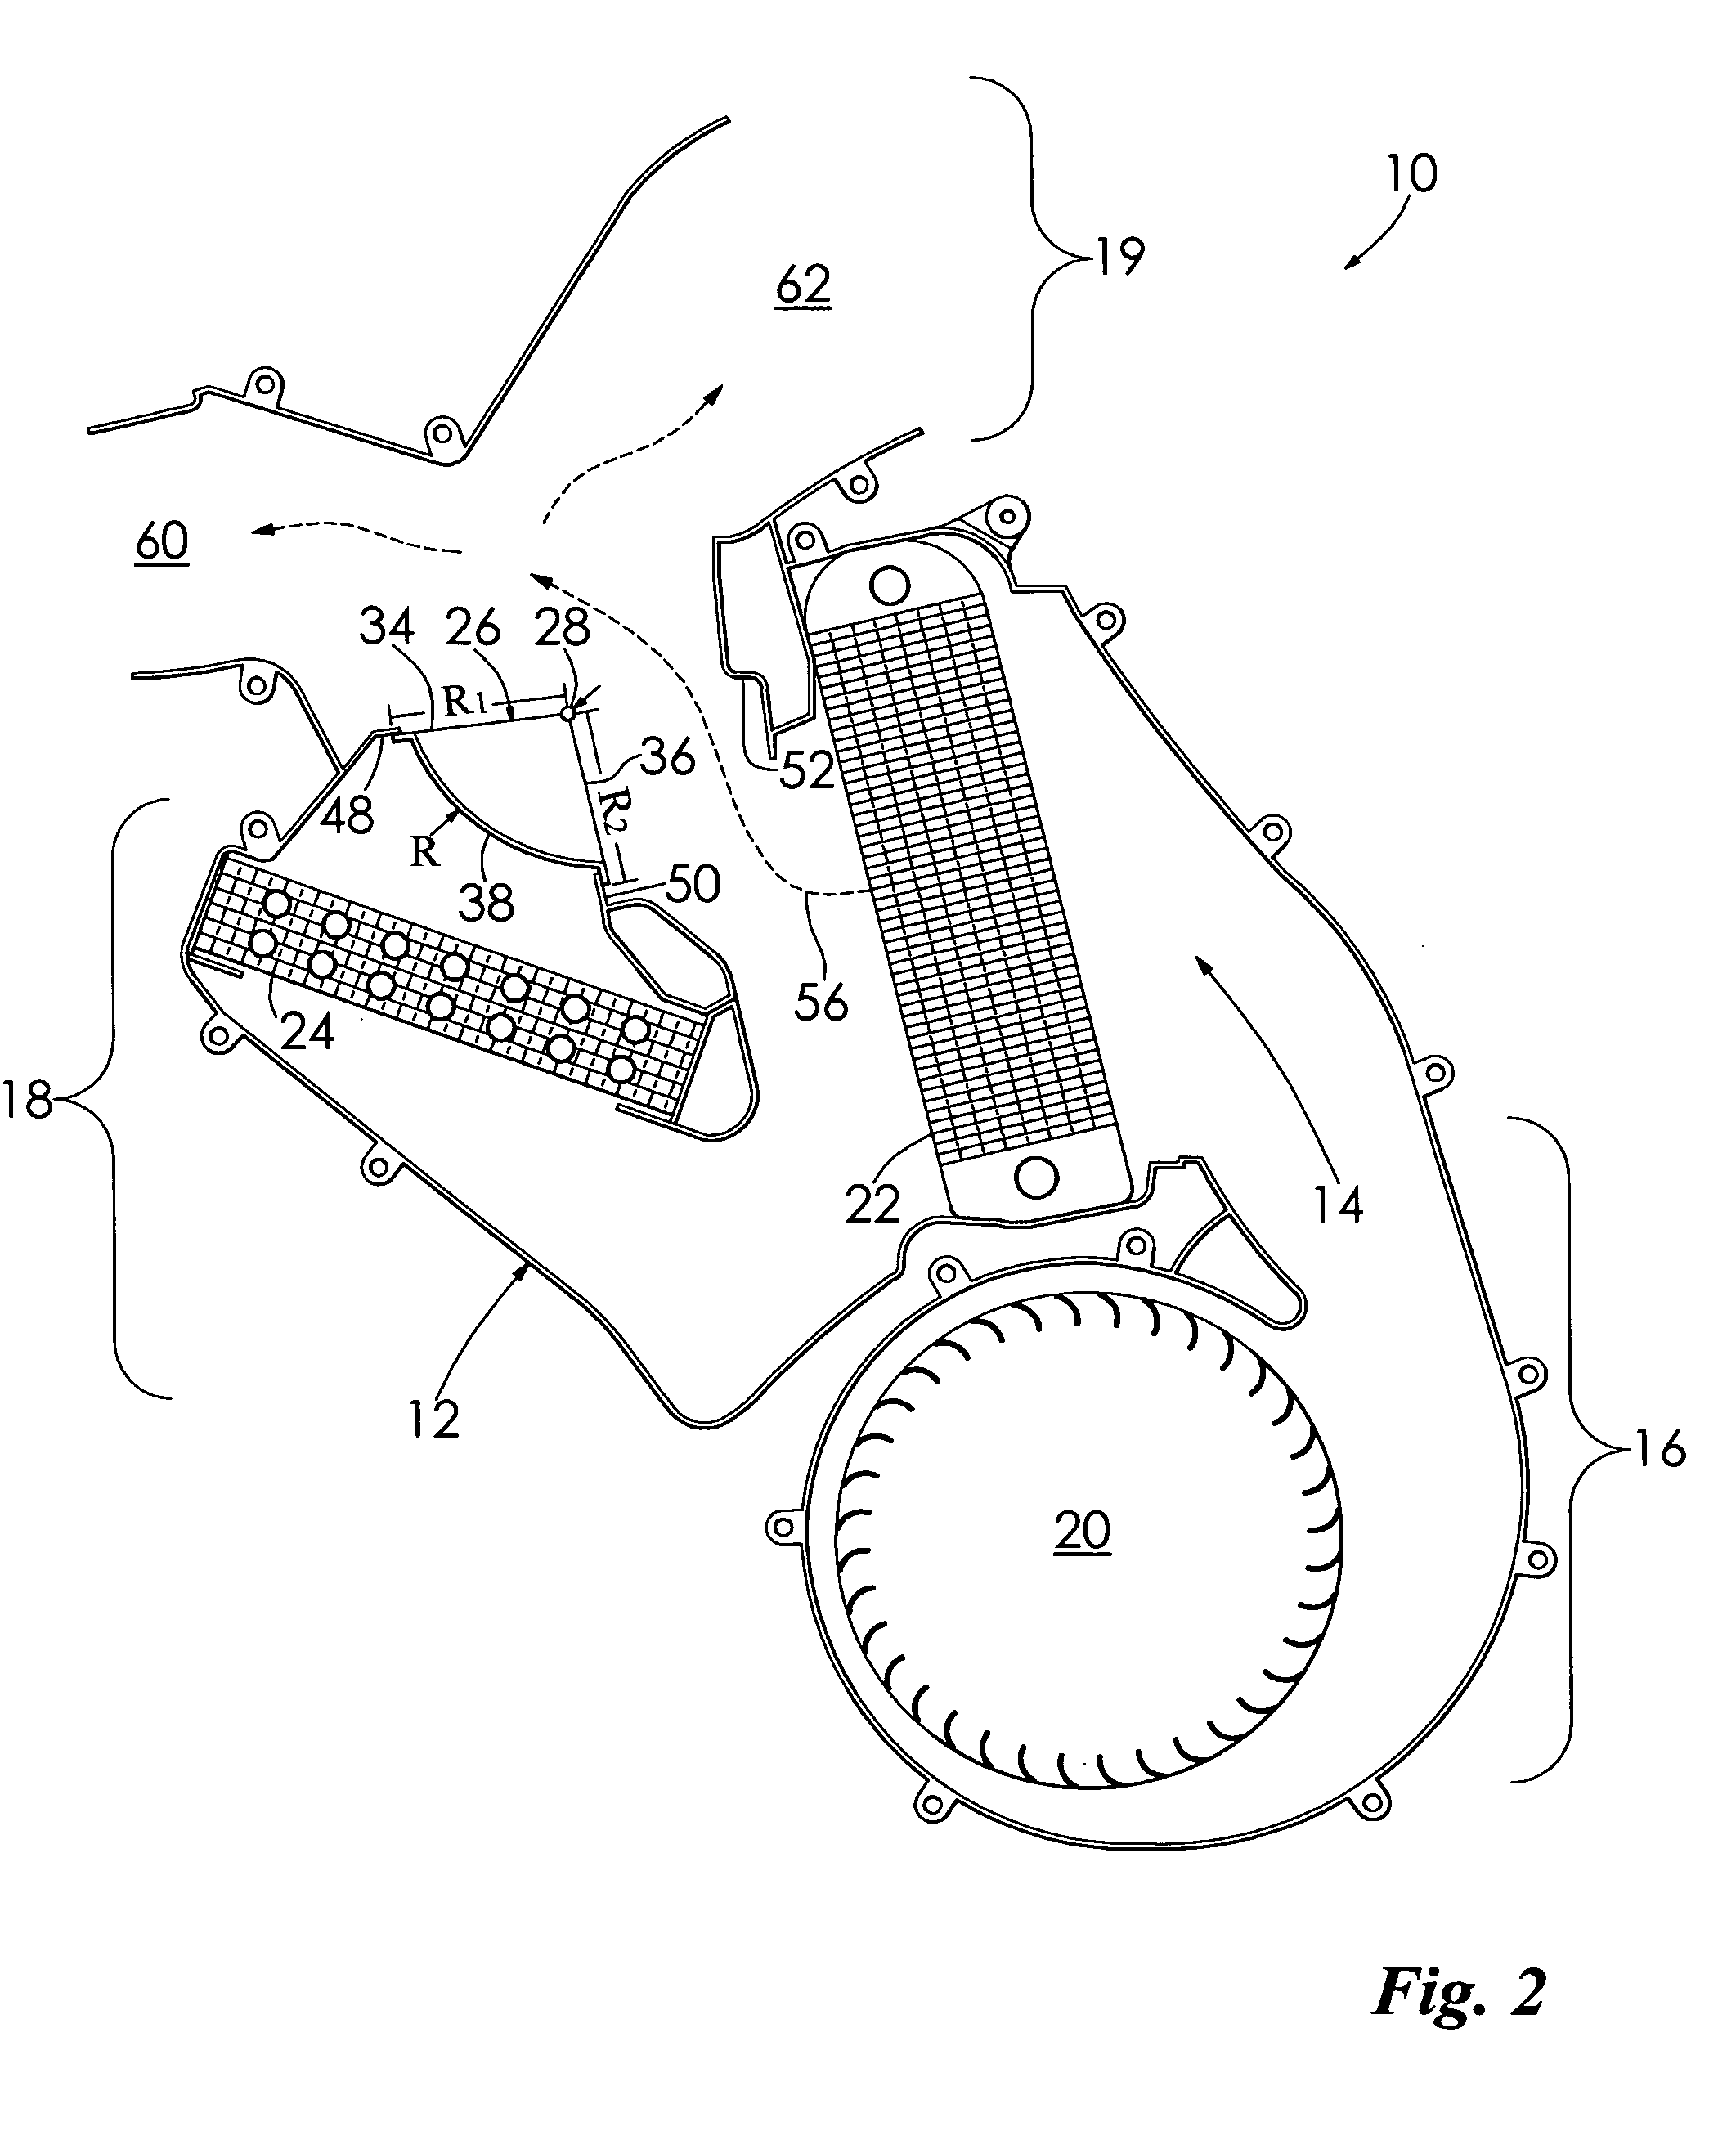 Temperature door for a vehicle and heating, ventilation, and air conditioning system